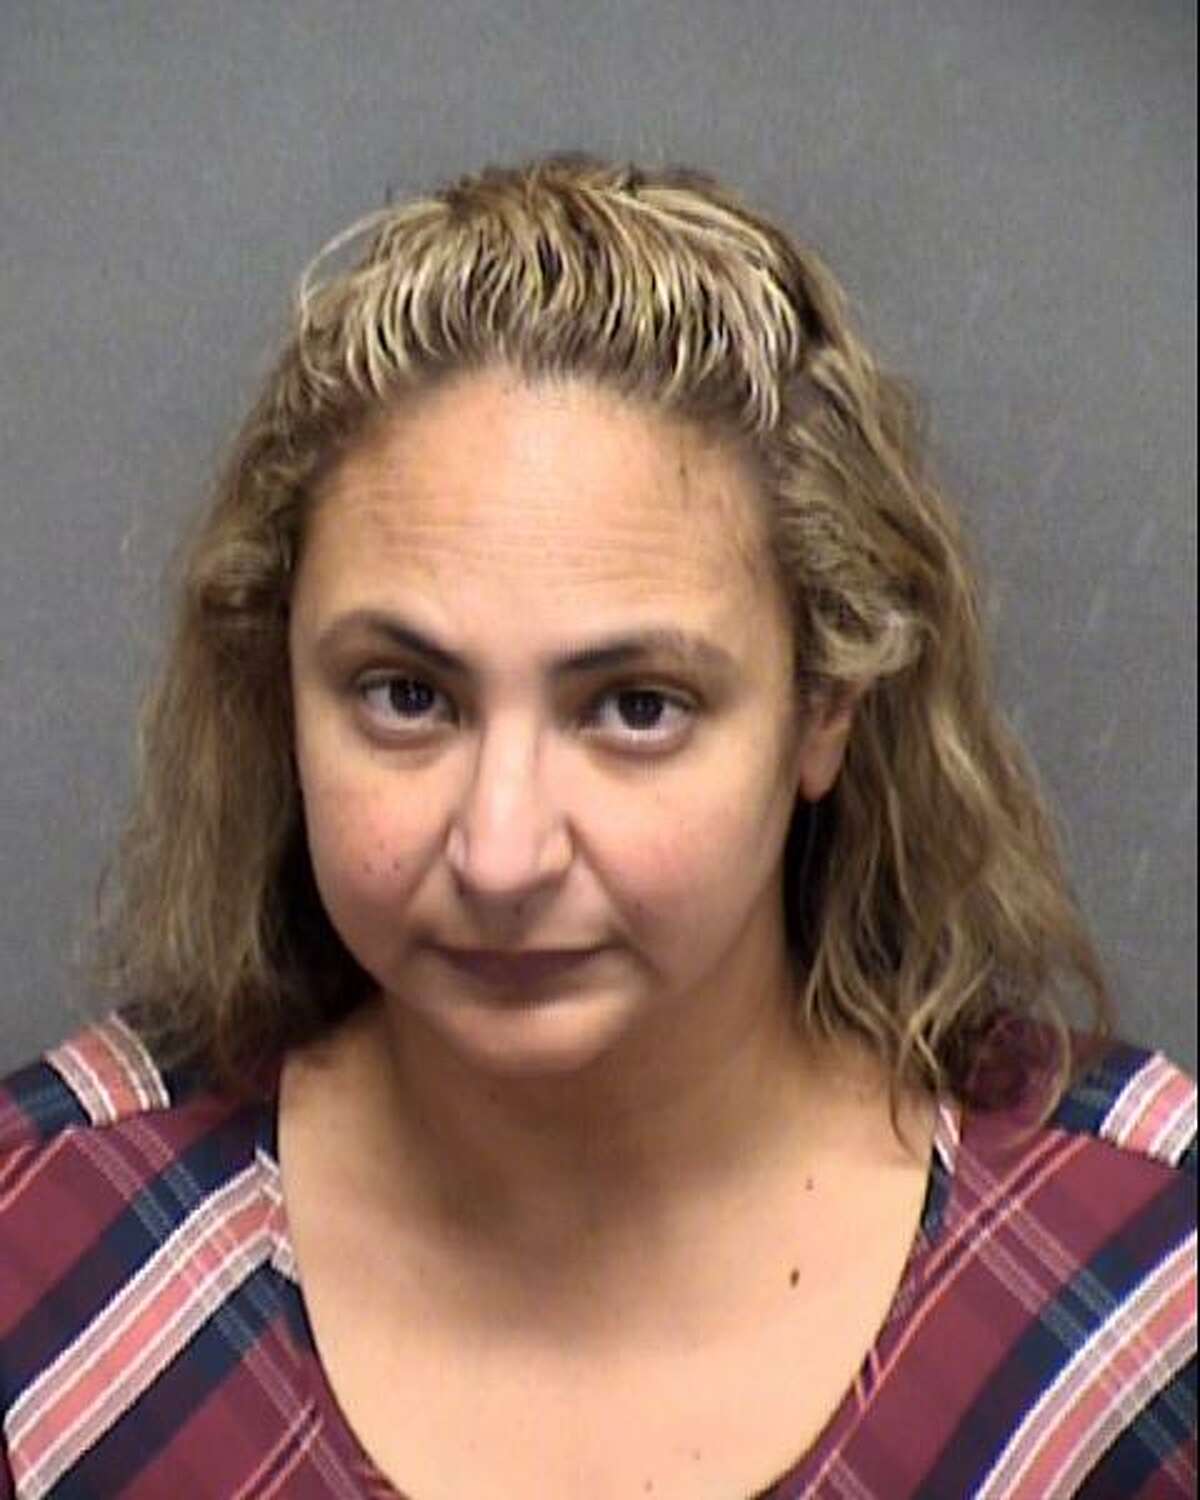 Monica Marie Padilla, a San Antonio bookkeeper, has been indicted by a San Antonio federal grand jury on 23 counts of wire fraud and seven counts of aggravated identity theft.